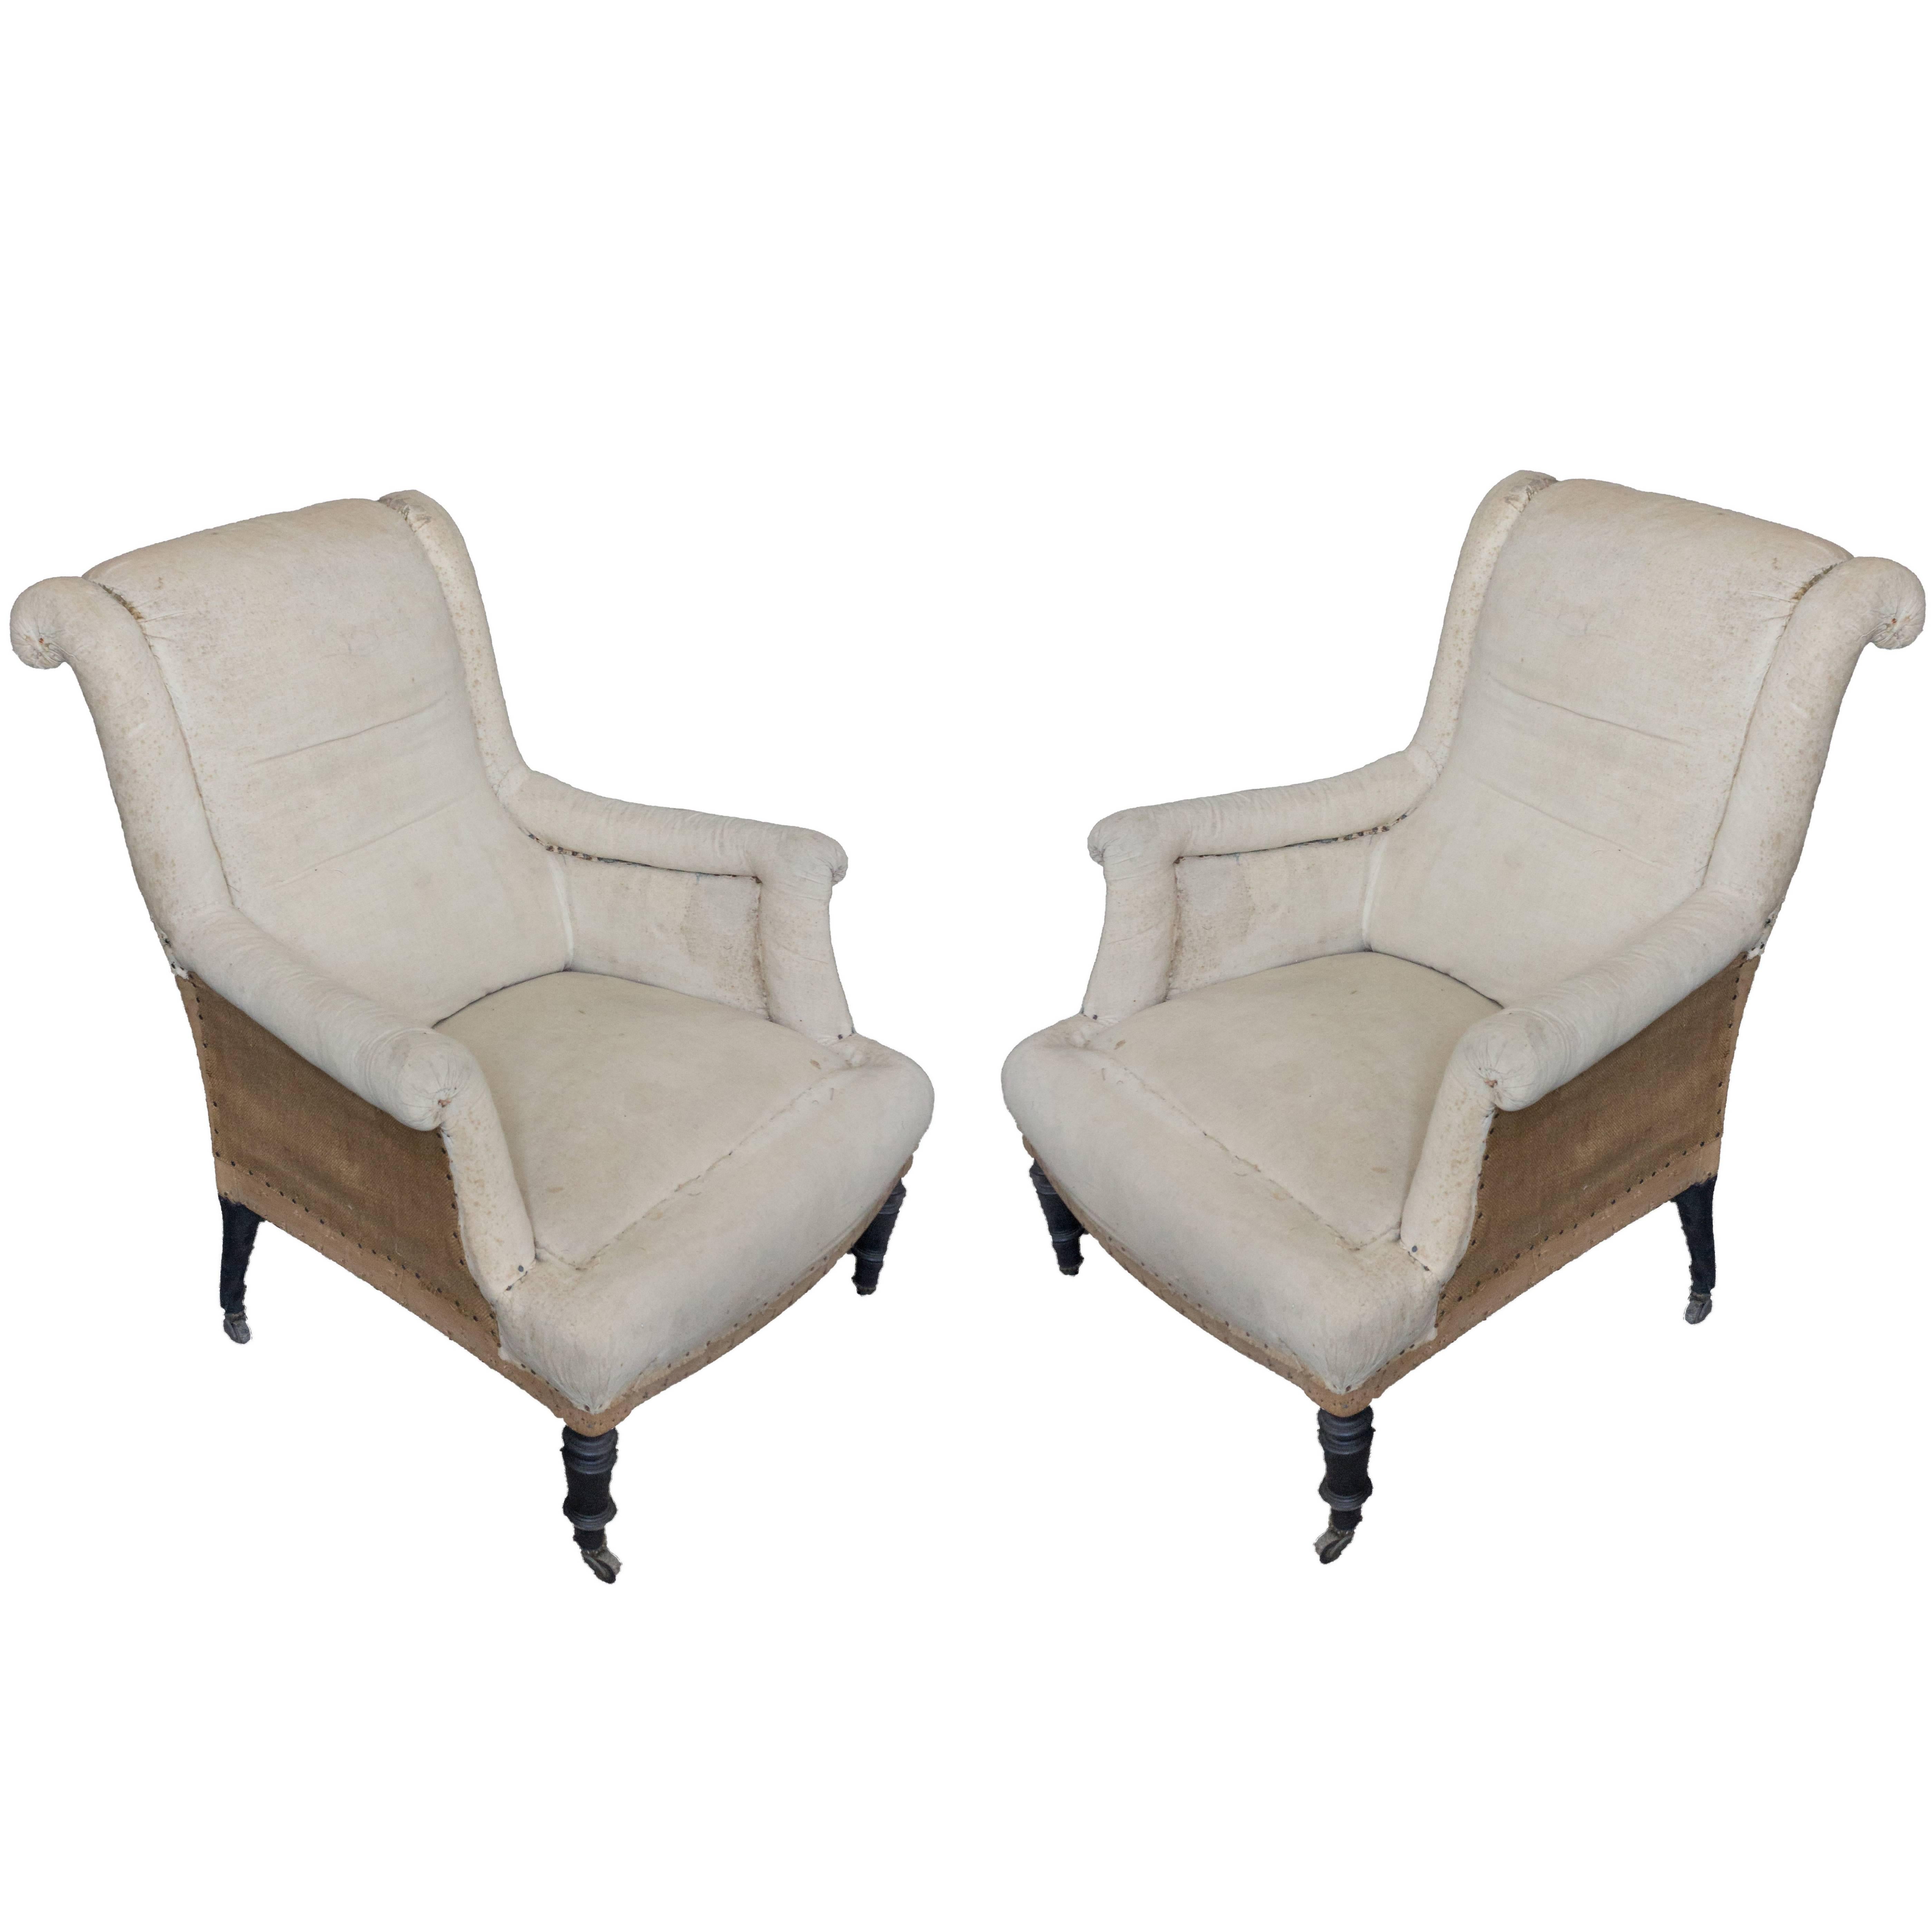 Pair of French 19th Century Napoleon III Scrolled Armchairs